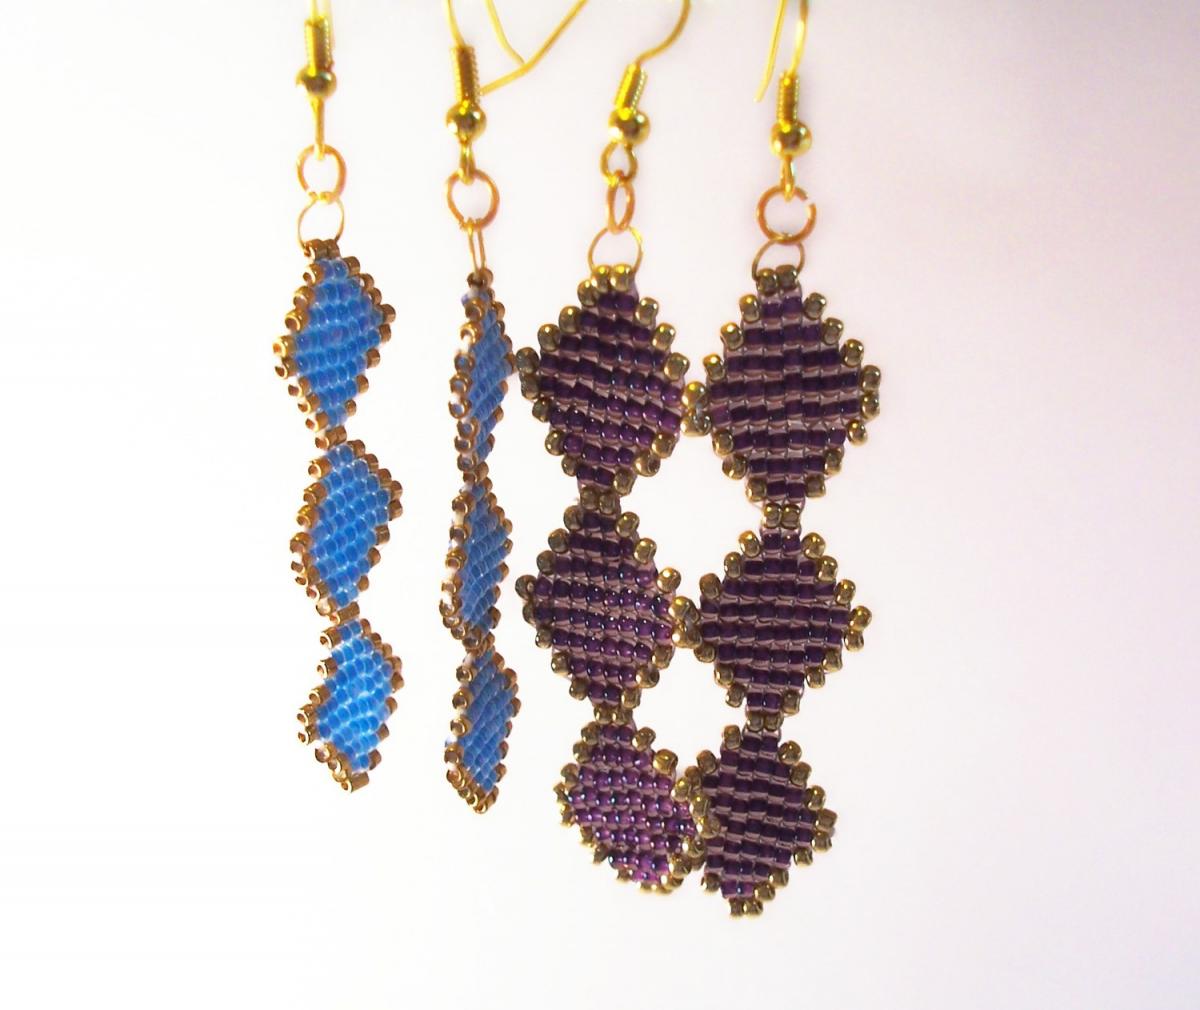 Stained Glass Earring Pattern, Beading Tutorial In Pdf